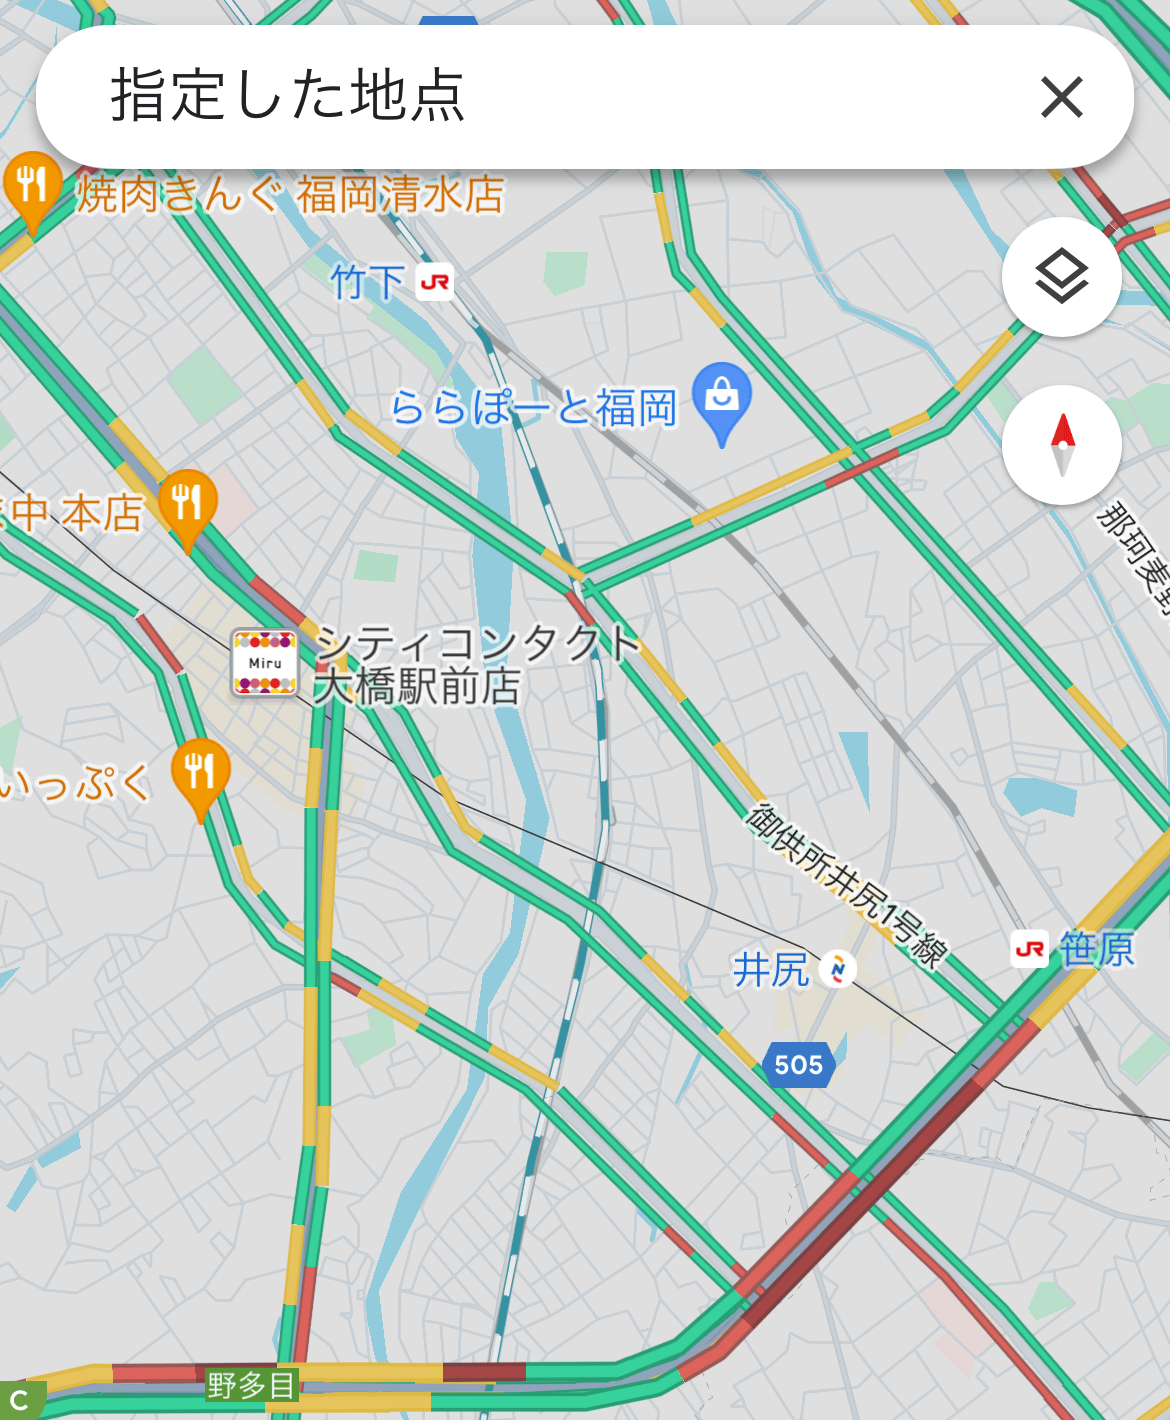 GoogleMaps newcolor 1